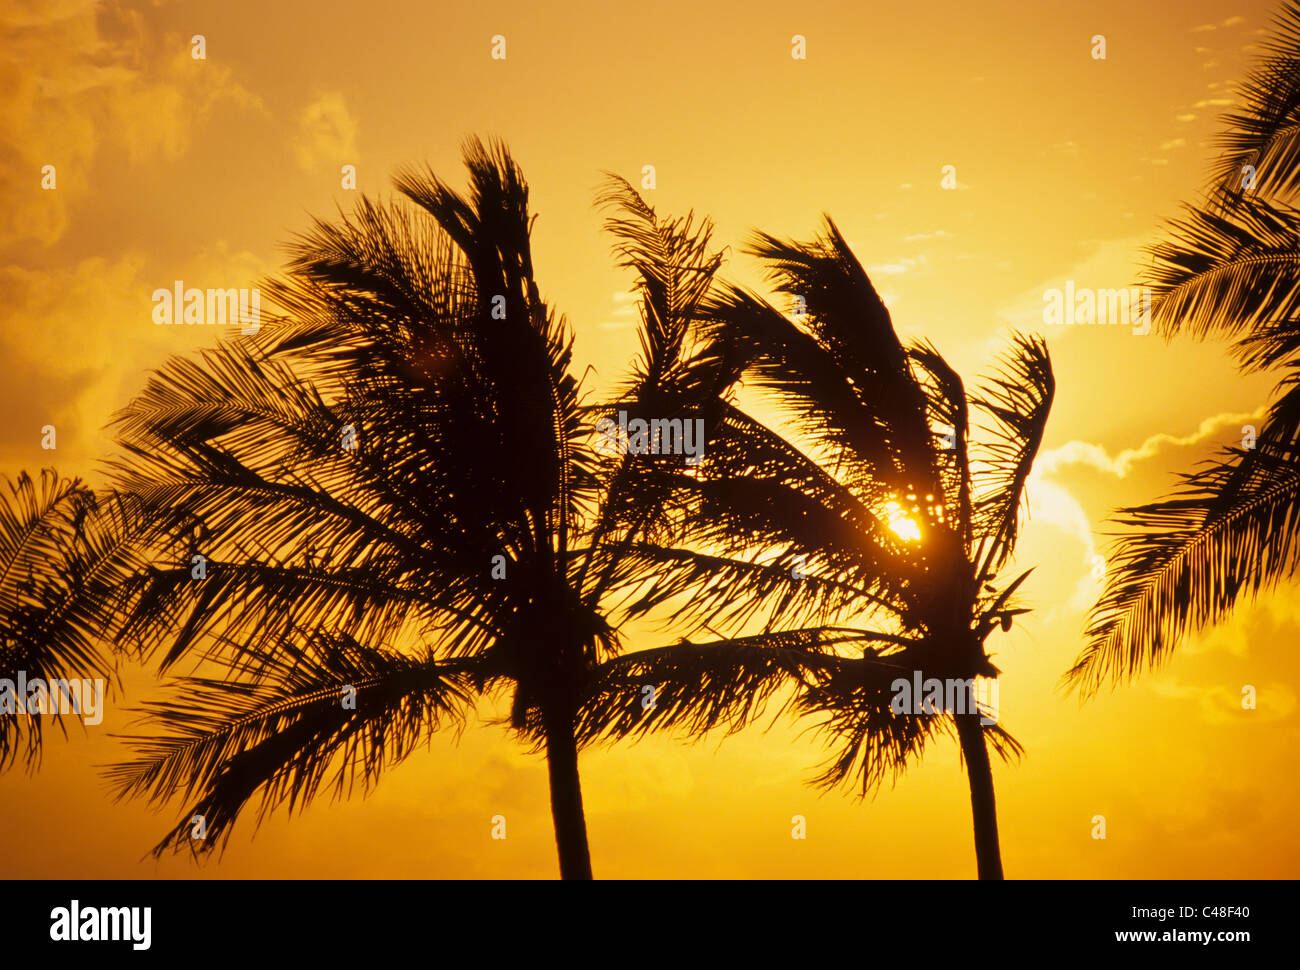 Palm trees silhouetted aganist sunset sky in Key Largo in the Florida Keys Stock Photo